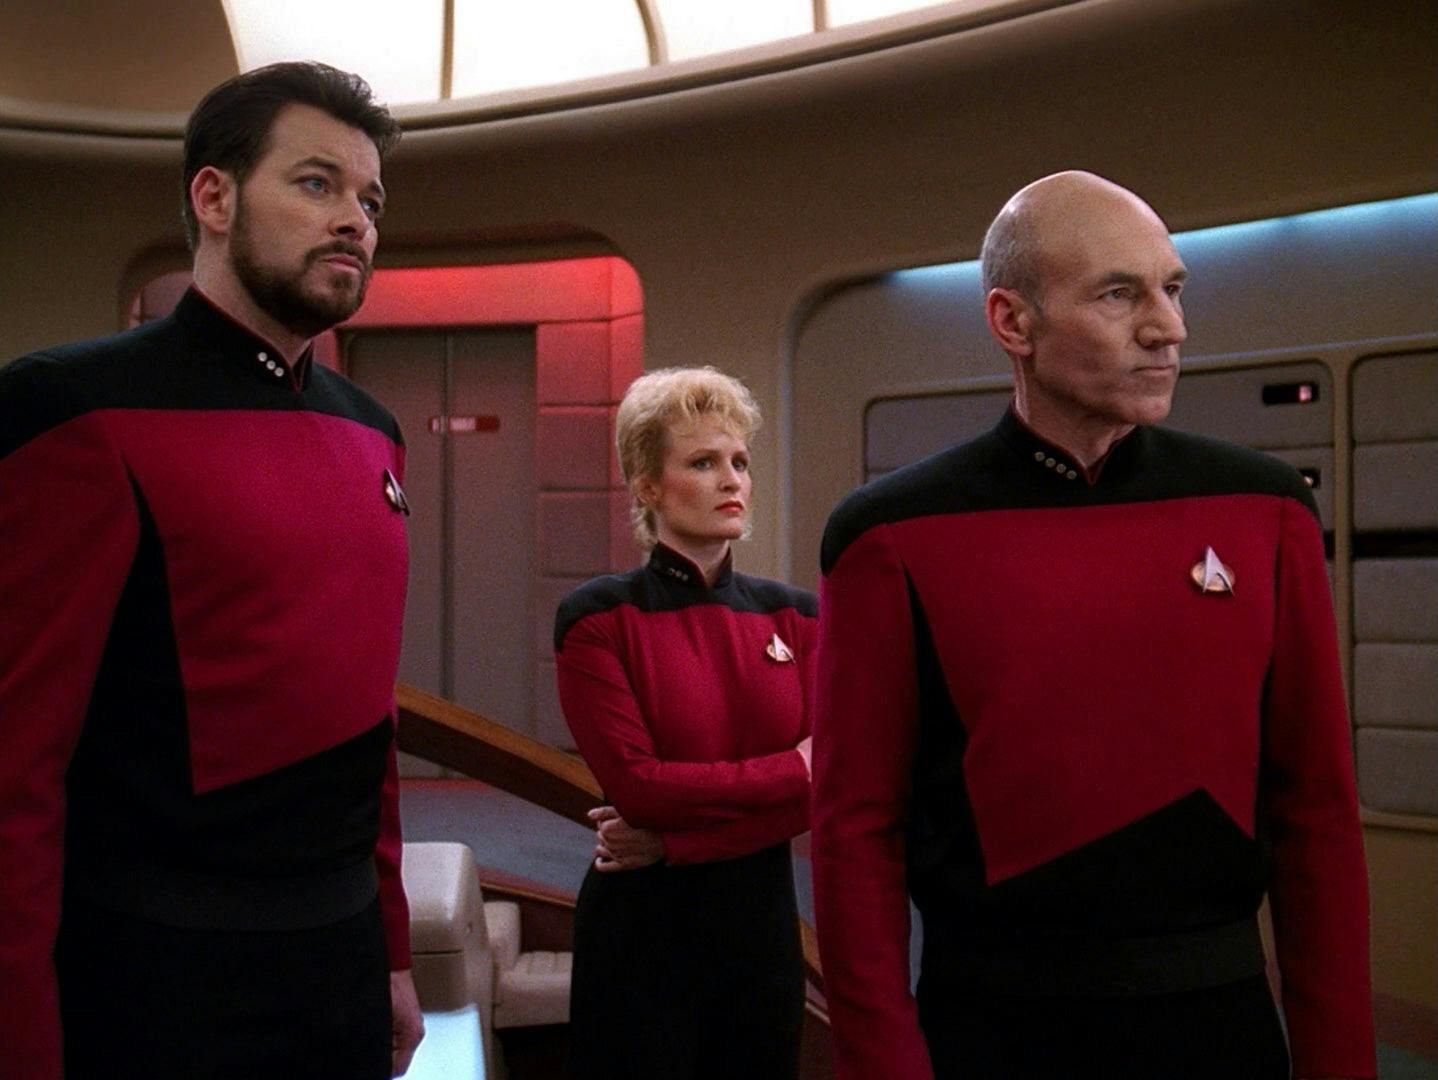 Will Riker and Jean-Luc Picard stand and sternly look at the Enterprise viewscreen ahead of them as Elizabeth Shelby wraps her arms around her and looks ahead in 'The Best of Both Worlds, Part I'